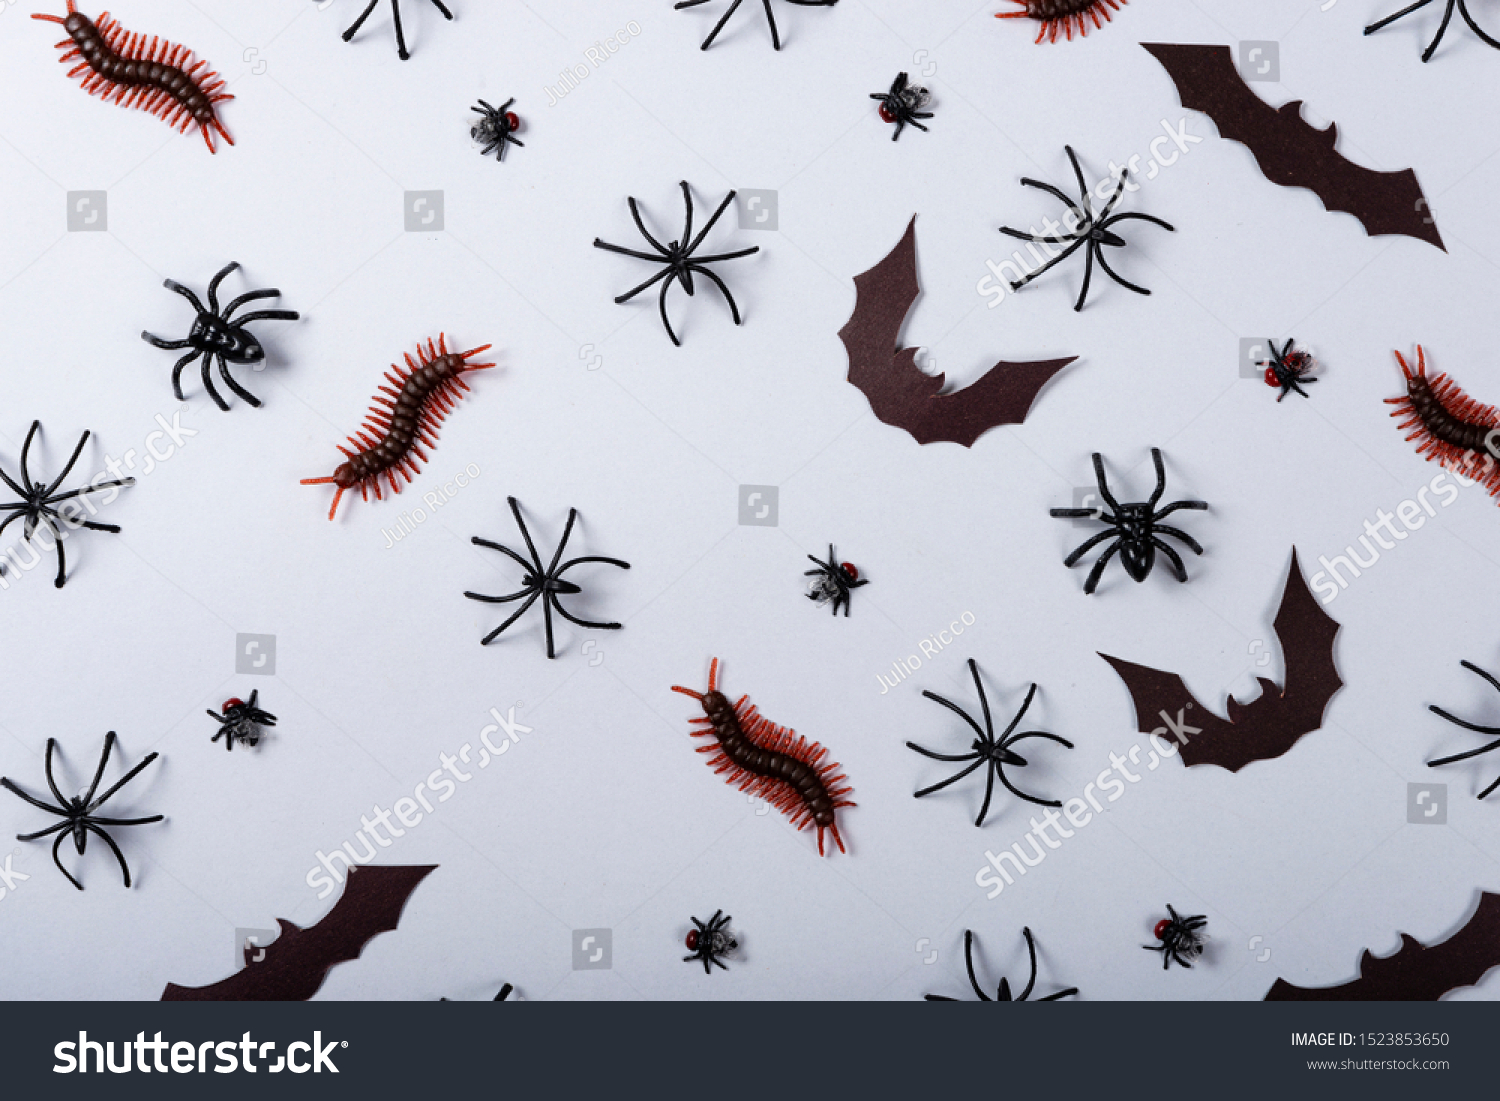 Halloween and decoration concept, miscellaneous bats, spiders, centipede and flies on gray background #1523853650